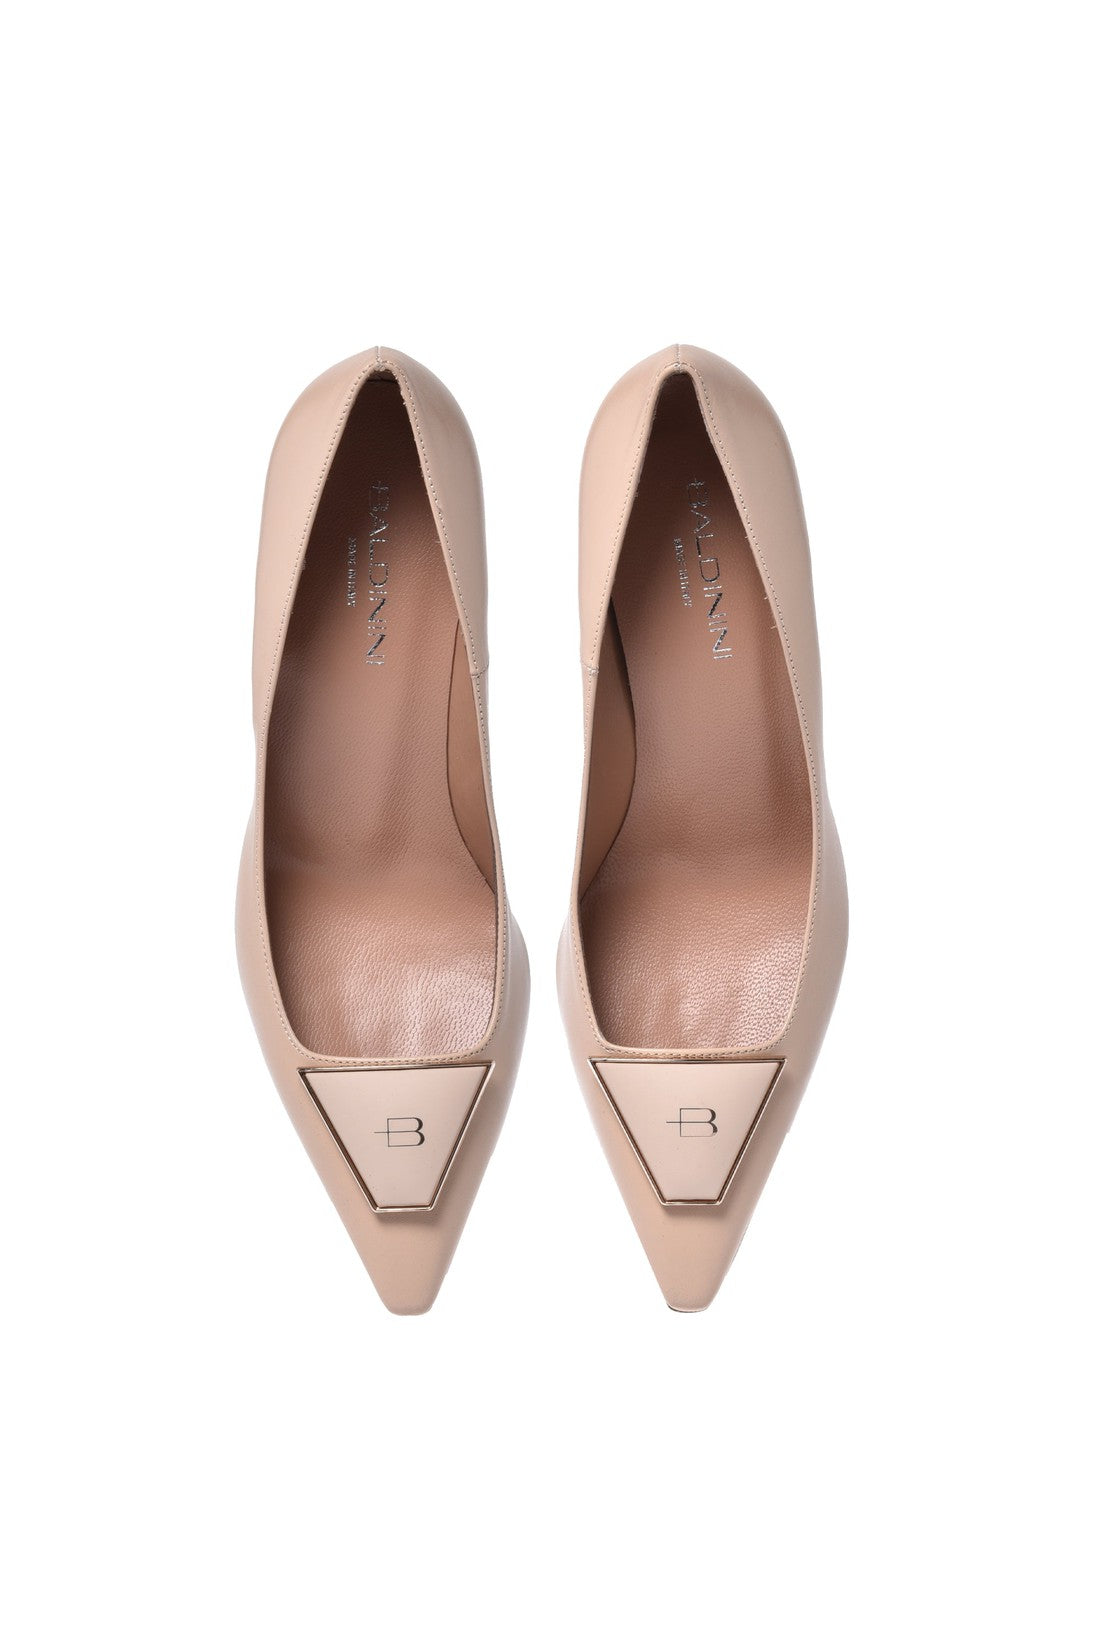 BALDININI-OUTLET-SALE-Court-shoe-in-taupe-nappa-leather-Pumps-ARCHIVE-COLLECTION-2.jpg